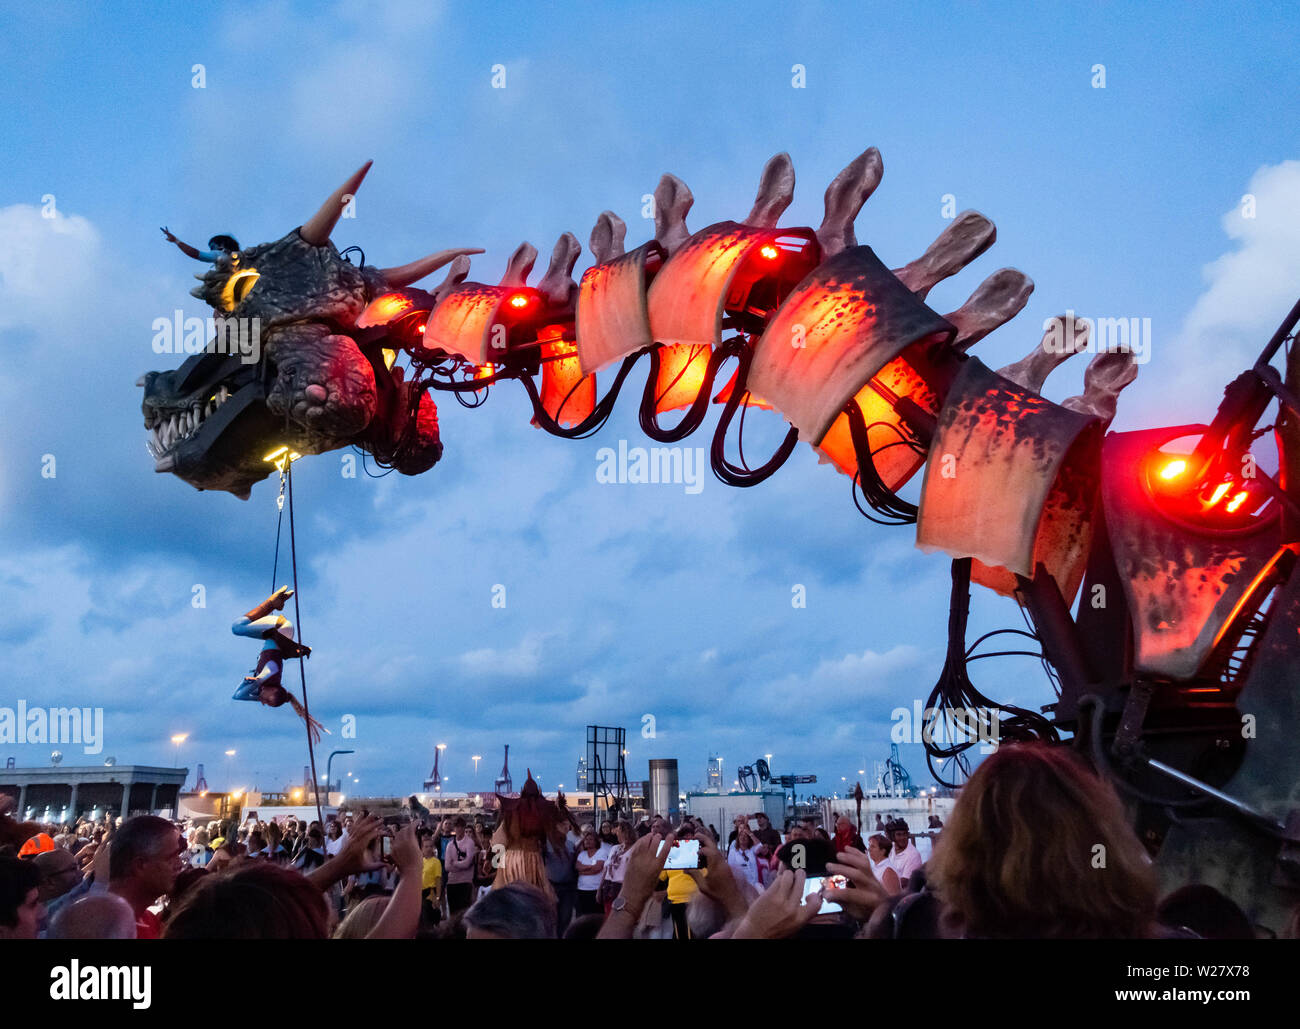 Las Palmas, Gran Canaria, Canary Islands, Spain. 6th July 2019. "Dragonautes", a huge Dragon, the creation of French theatre group, Planete Vapeur, takes to the streets of Las Palmas as the 2019 festival of theatre, music and dance (TEMUDAS) gets under way. Credit:Alan Dawson/Alamy Live News. Stock Photo